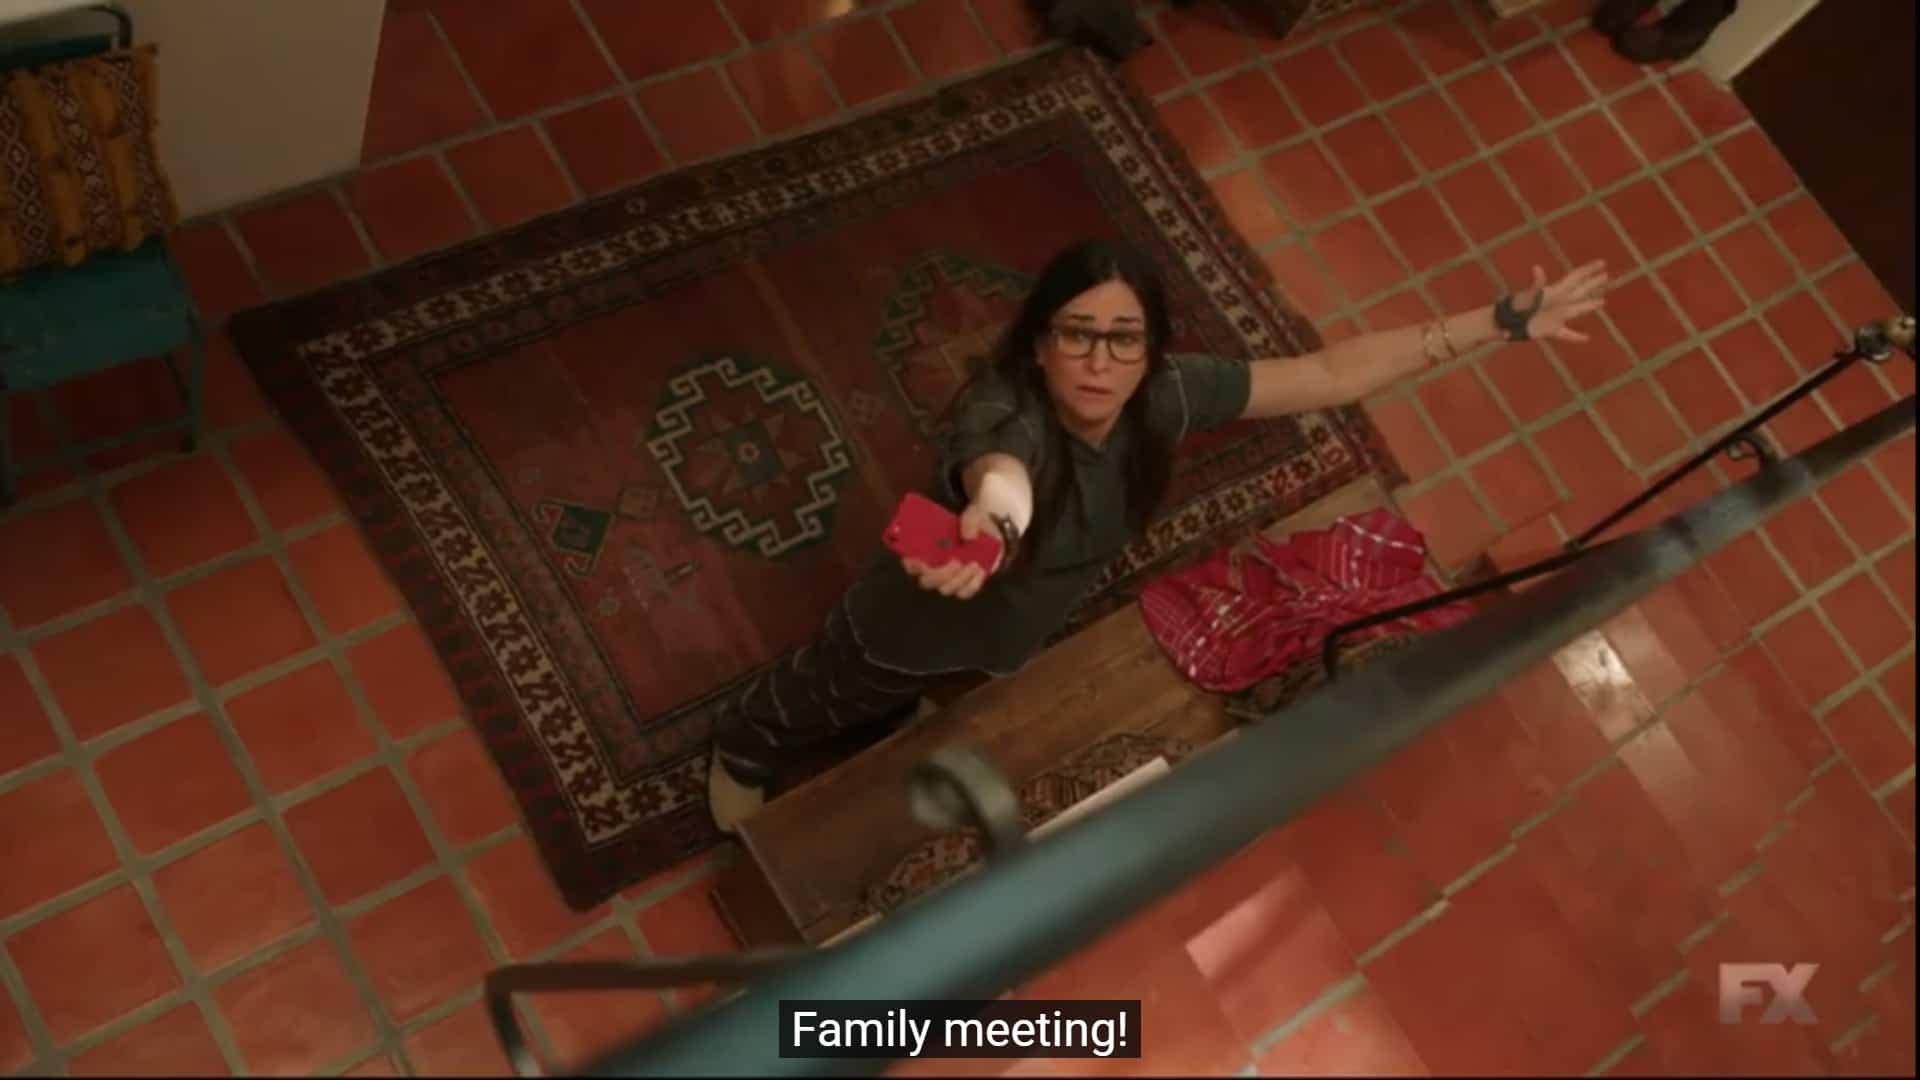 Sam calling for a family meeting